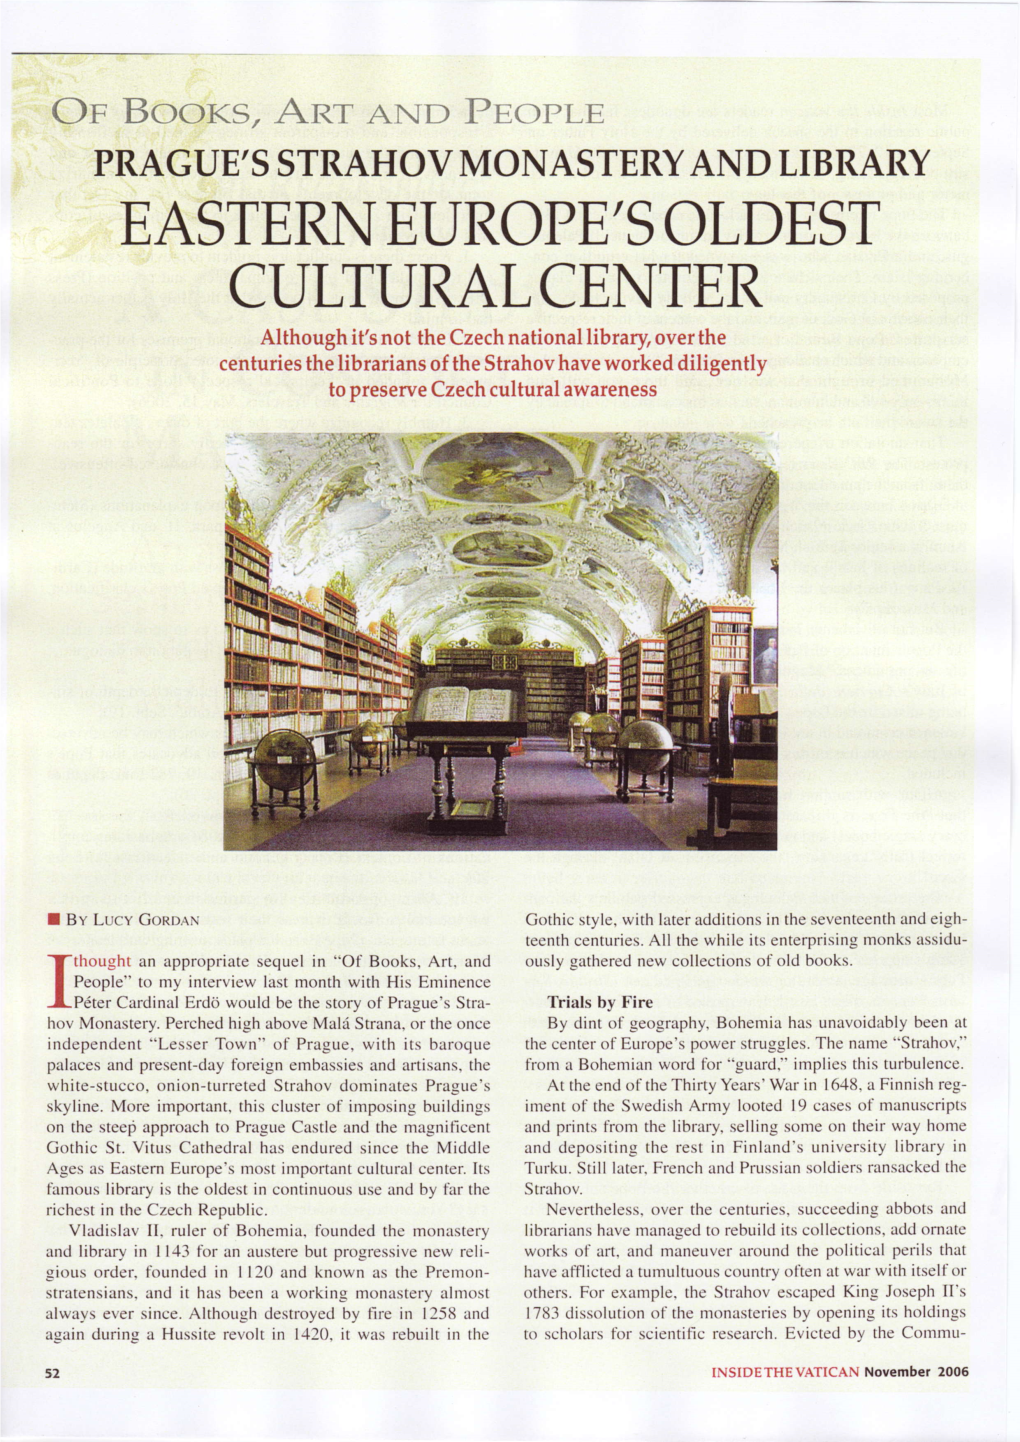 Eastern Europe's Oldest Culturalcenter